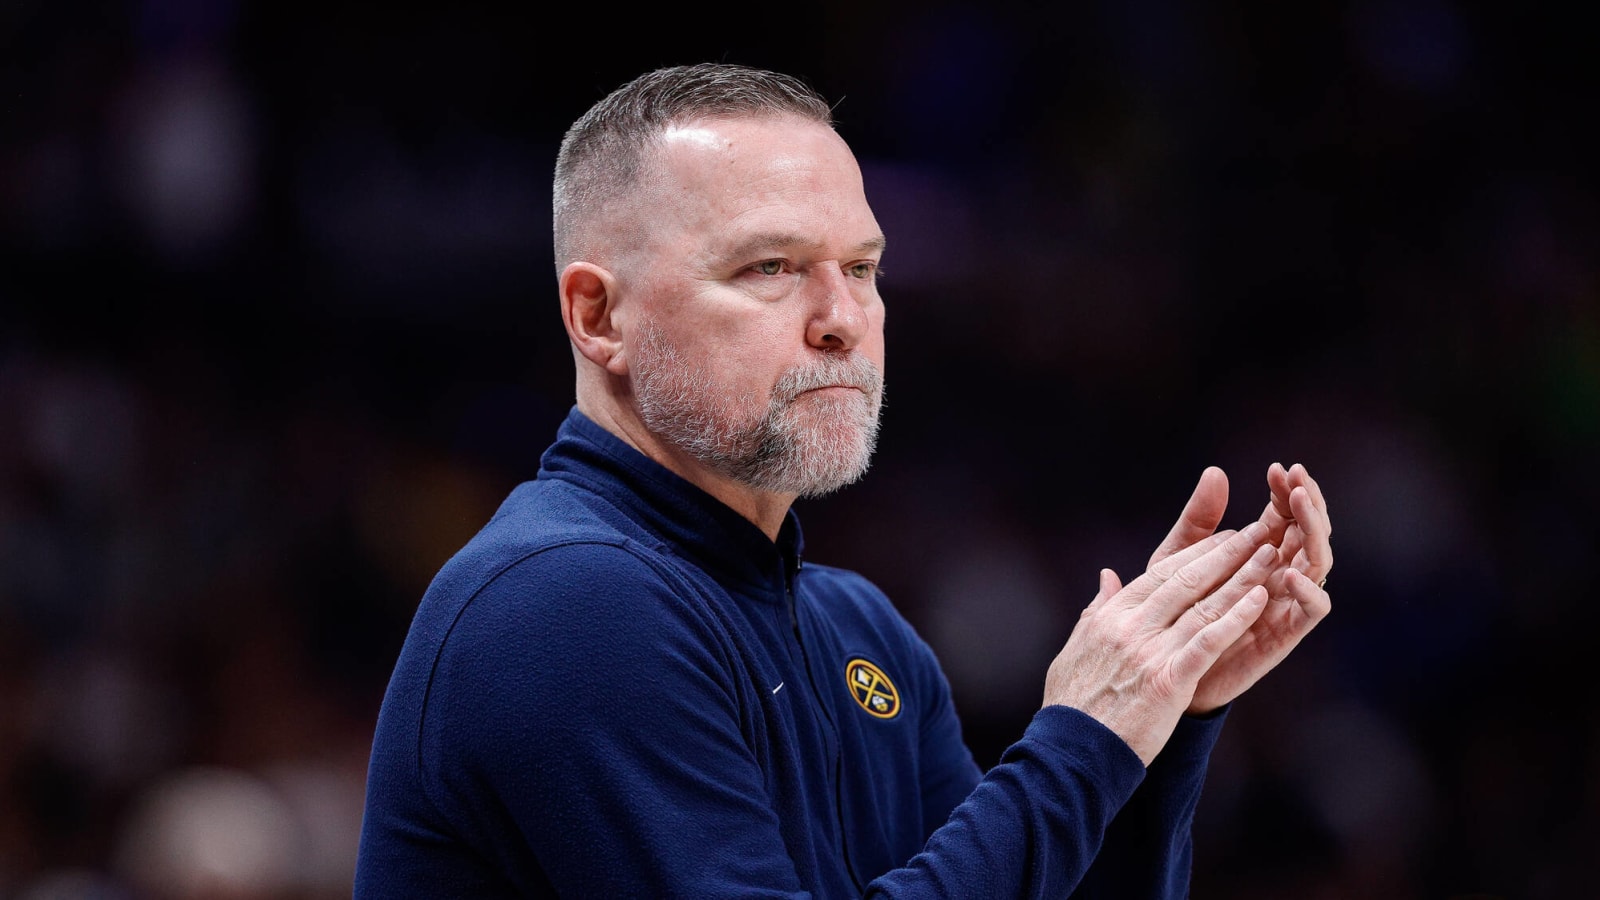 Nuggets head coach called 'classless' for season-ending comments